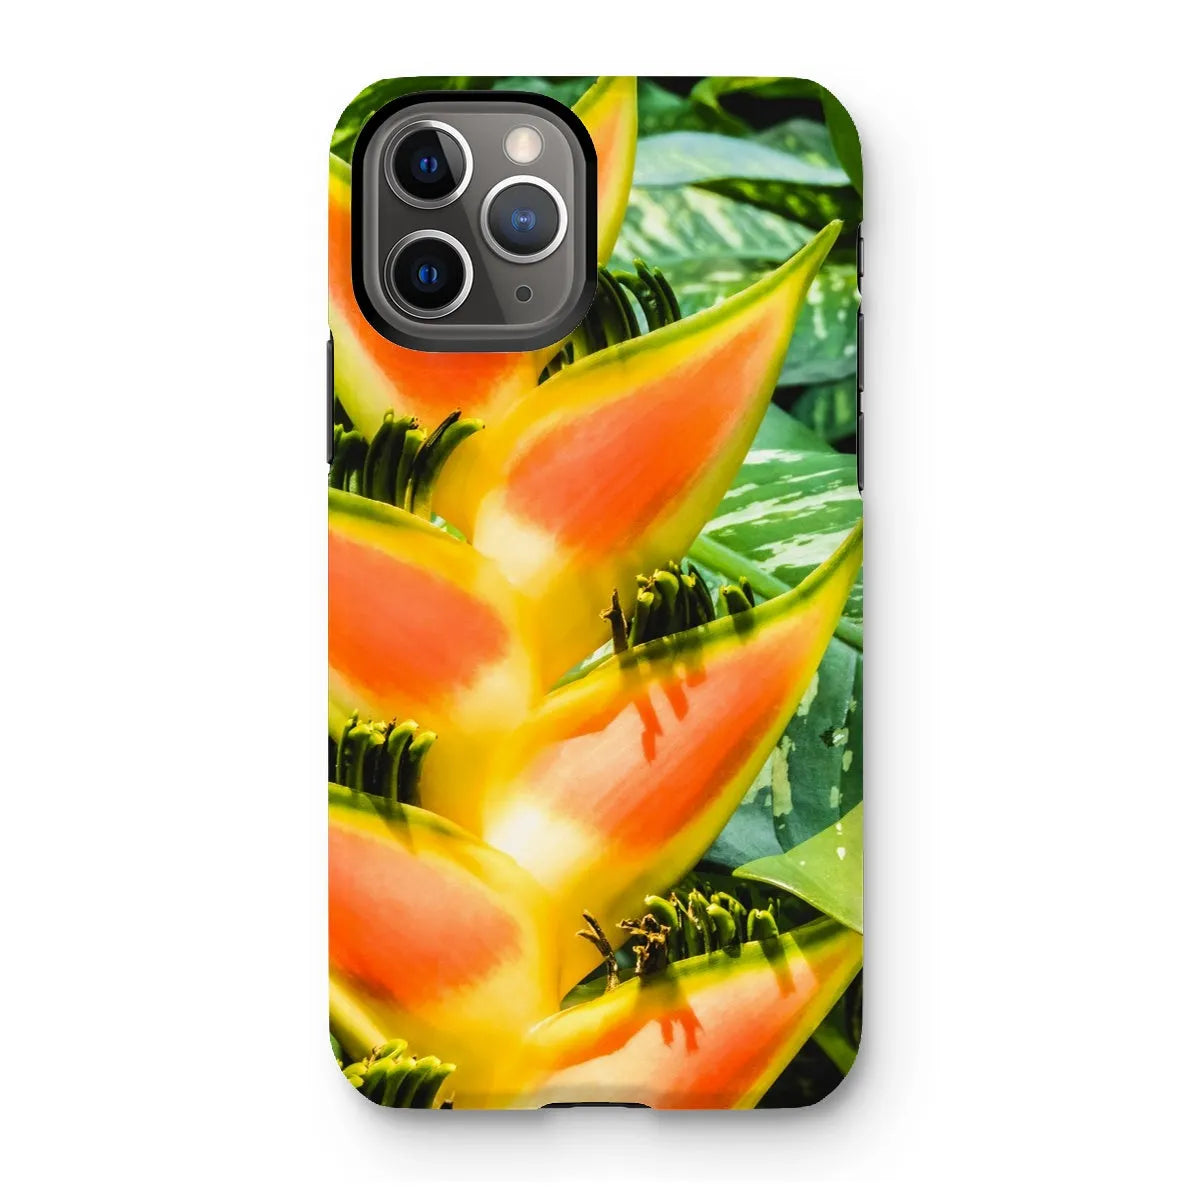 Showstopper Tough Phone Case - Iphone 11 Pro / Matte - Mobile Phone Cases - Aesthetic Art